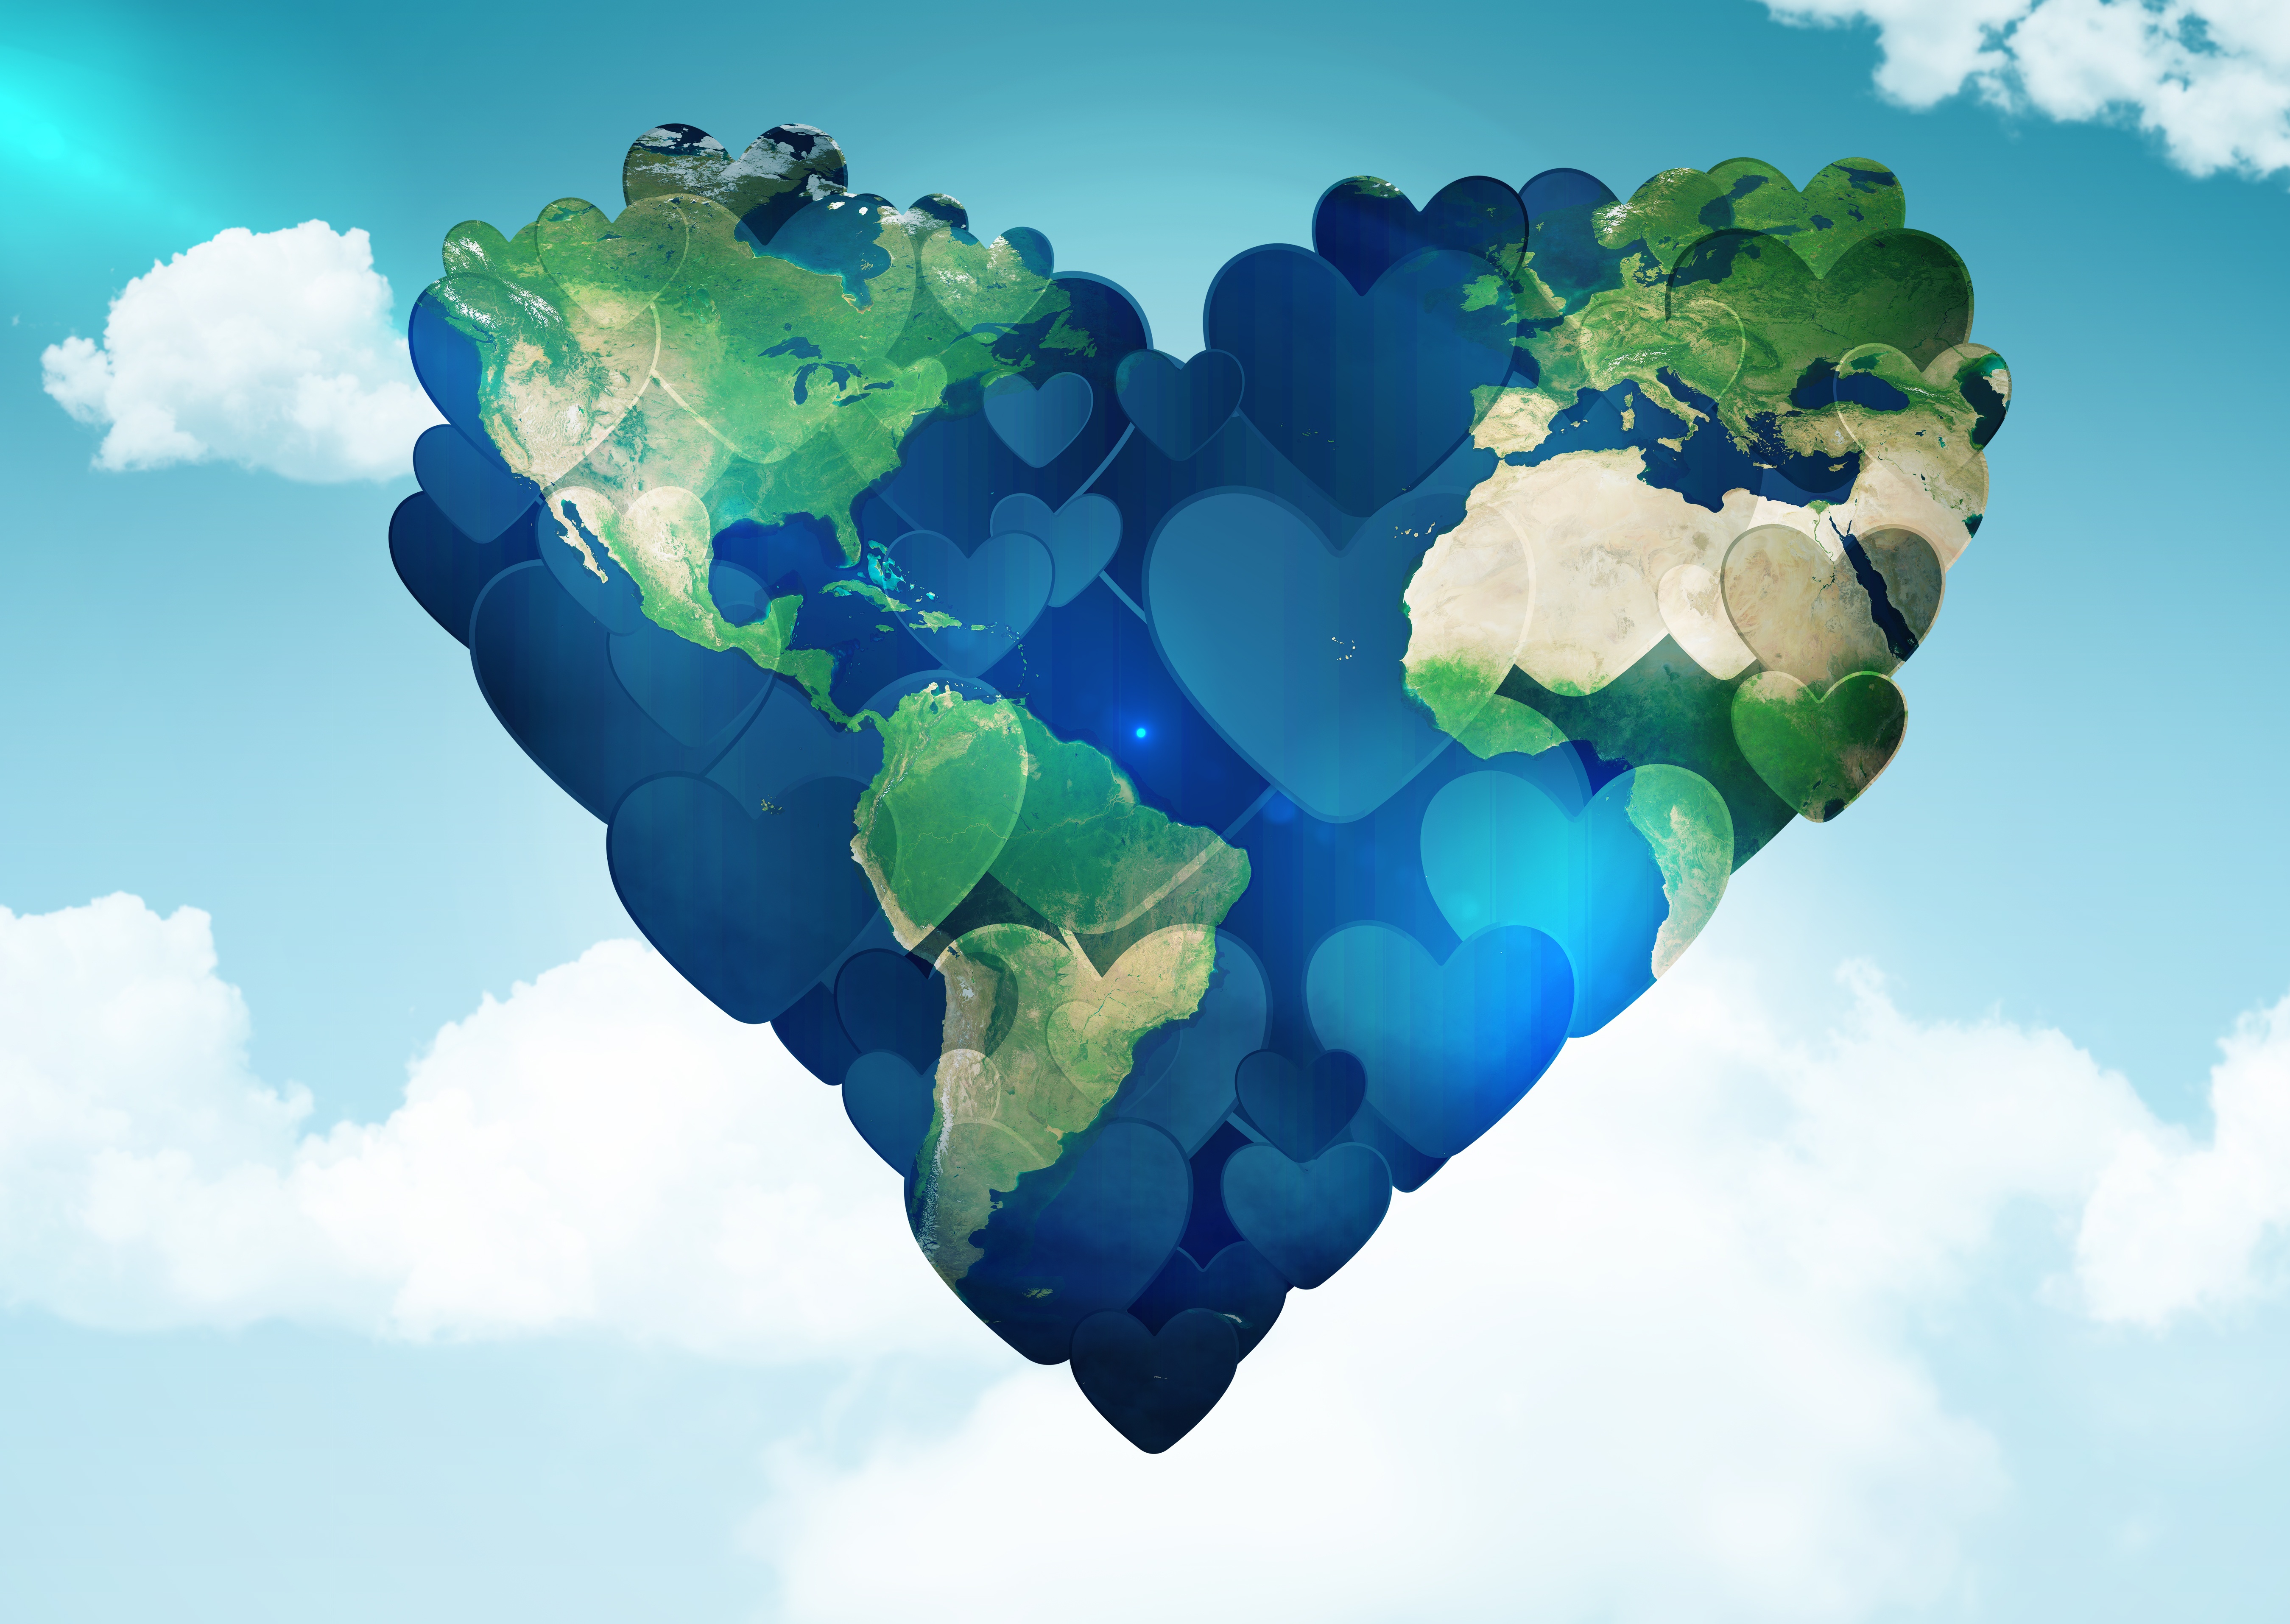 Earth in the shape of a heart with a sky background